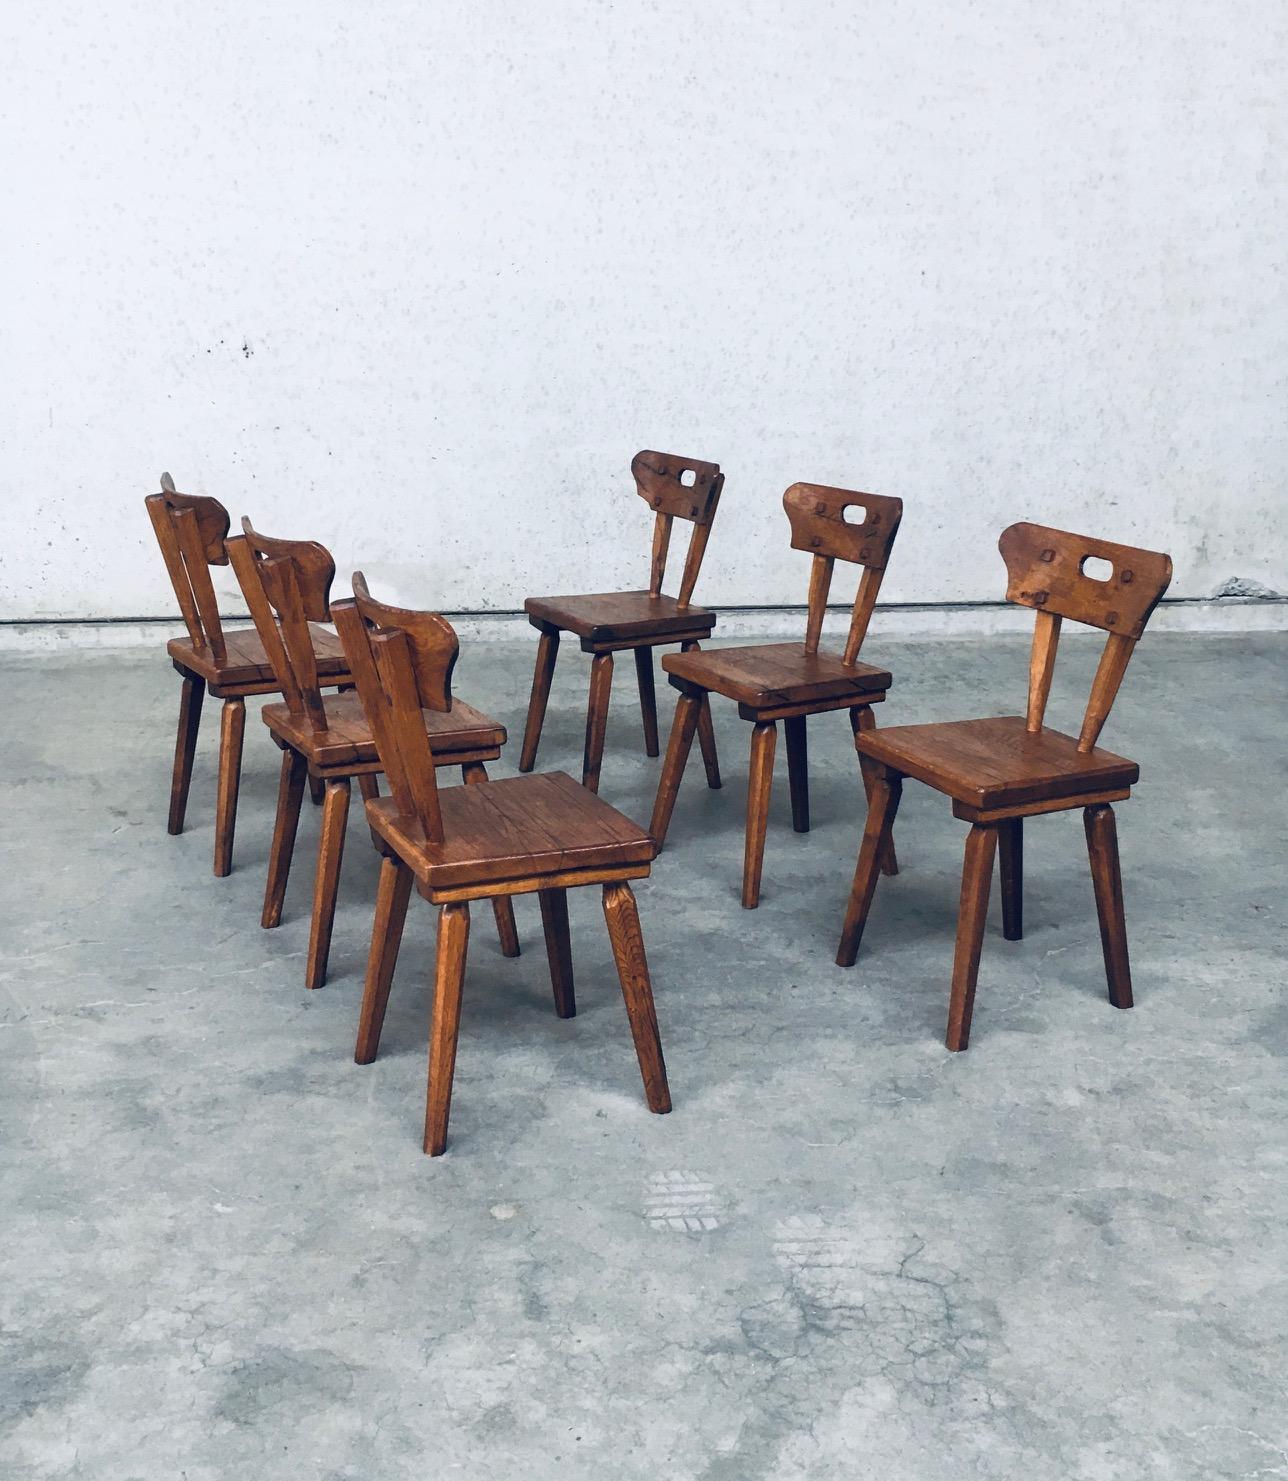 Mid-20th Century Handcrafted Folk Art Rustic Oak Dining Chair Set, France, 1940s For Sale